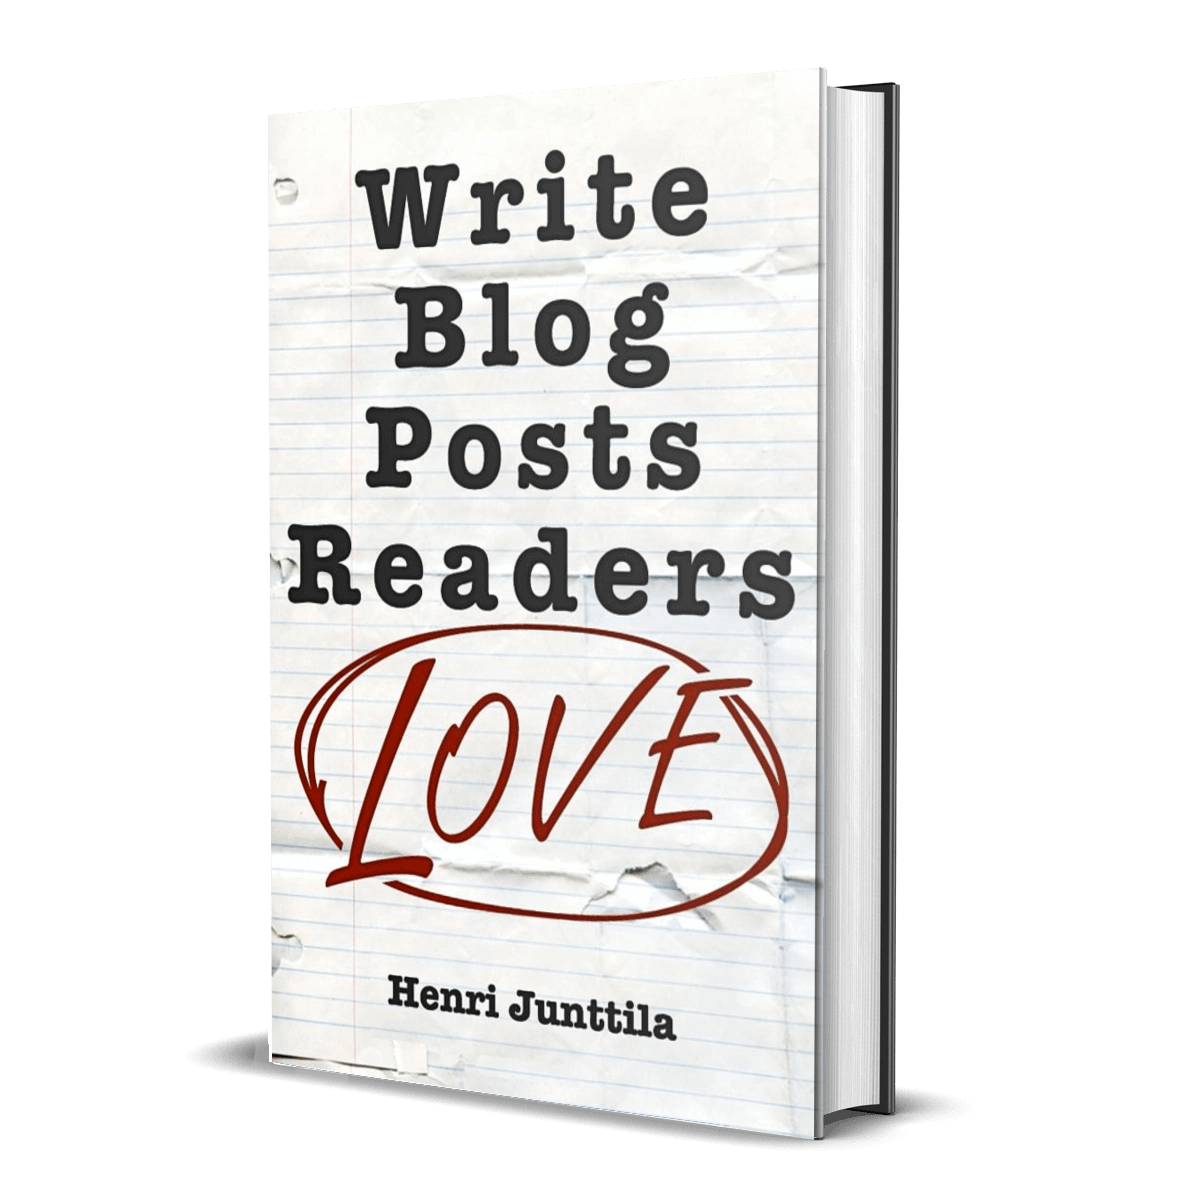 Write Blog Posts Readers Love by Henri Junttila is among the best blogging books for improving your writing process.